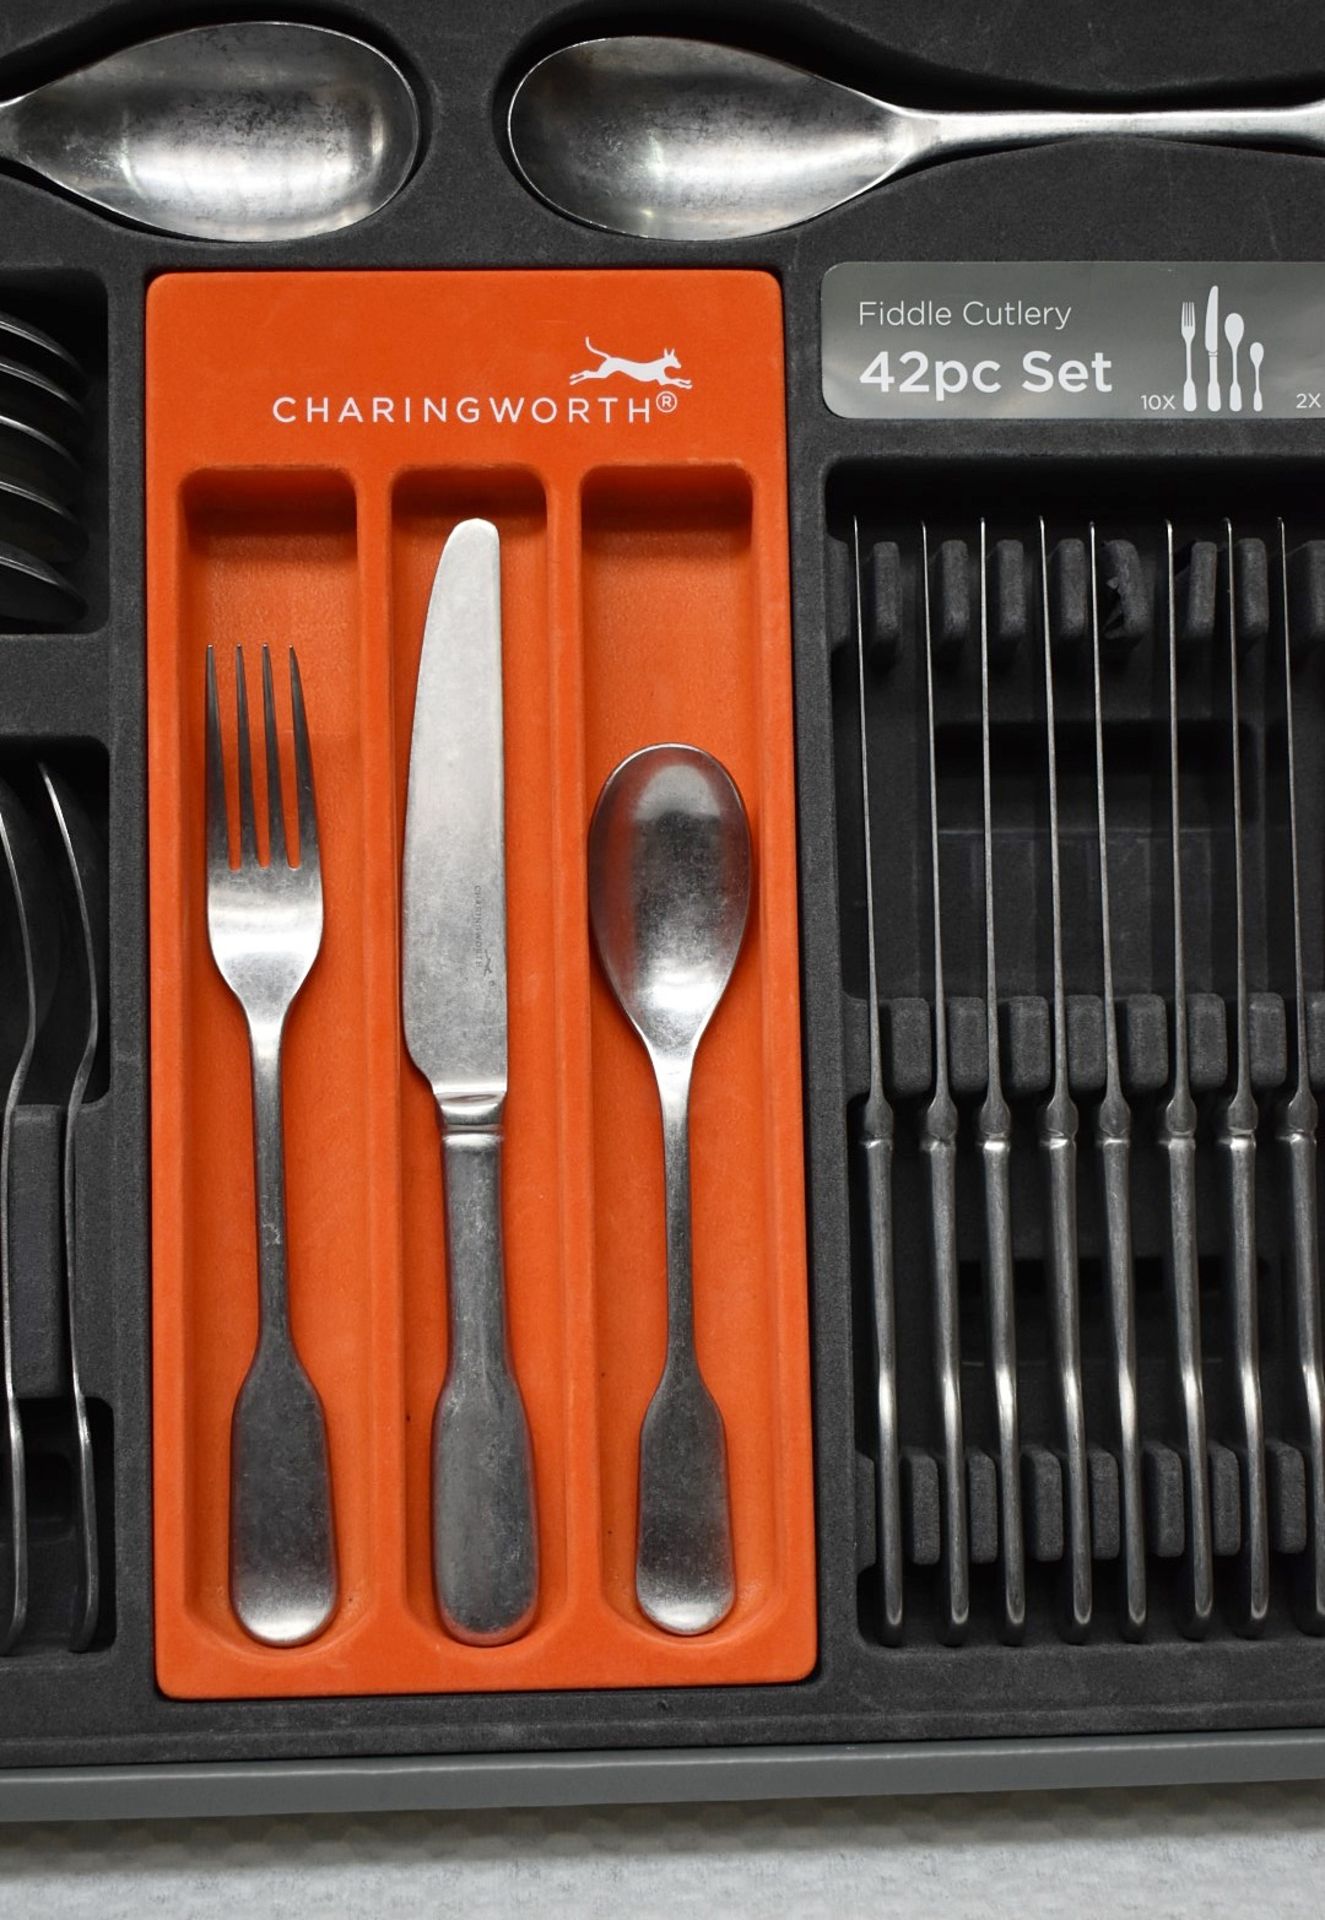 1 x CHARINGWORTH 'Fiddle' Luxury Vintage-style 42-Piece Cutlery Set - Original Price £370.00 - Boxed - Image 4 of 11